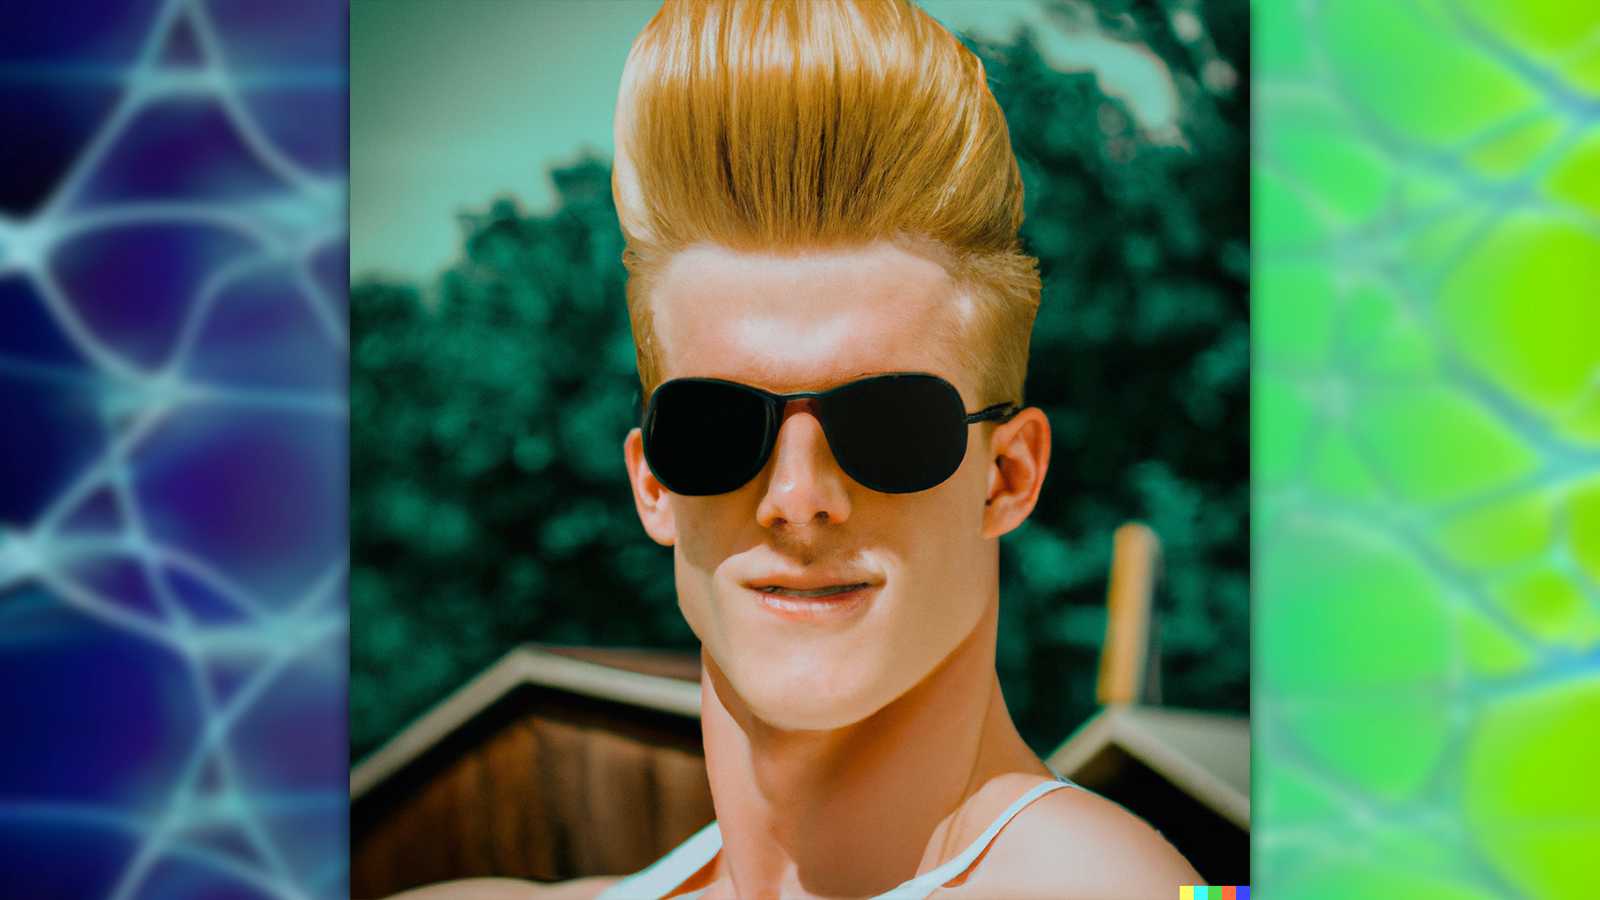 Johnny Bravo made by DALLE